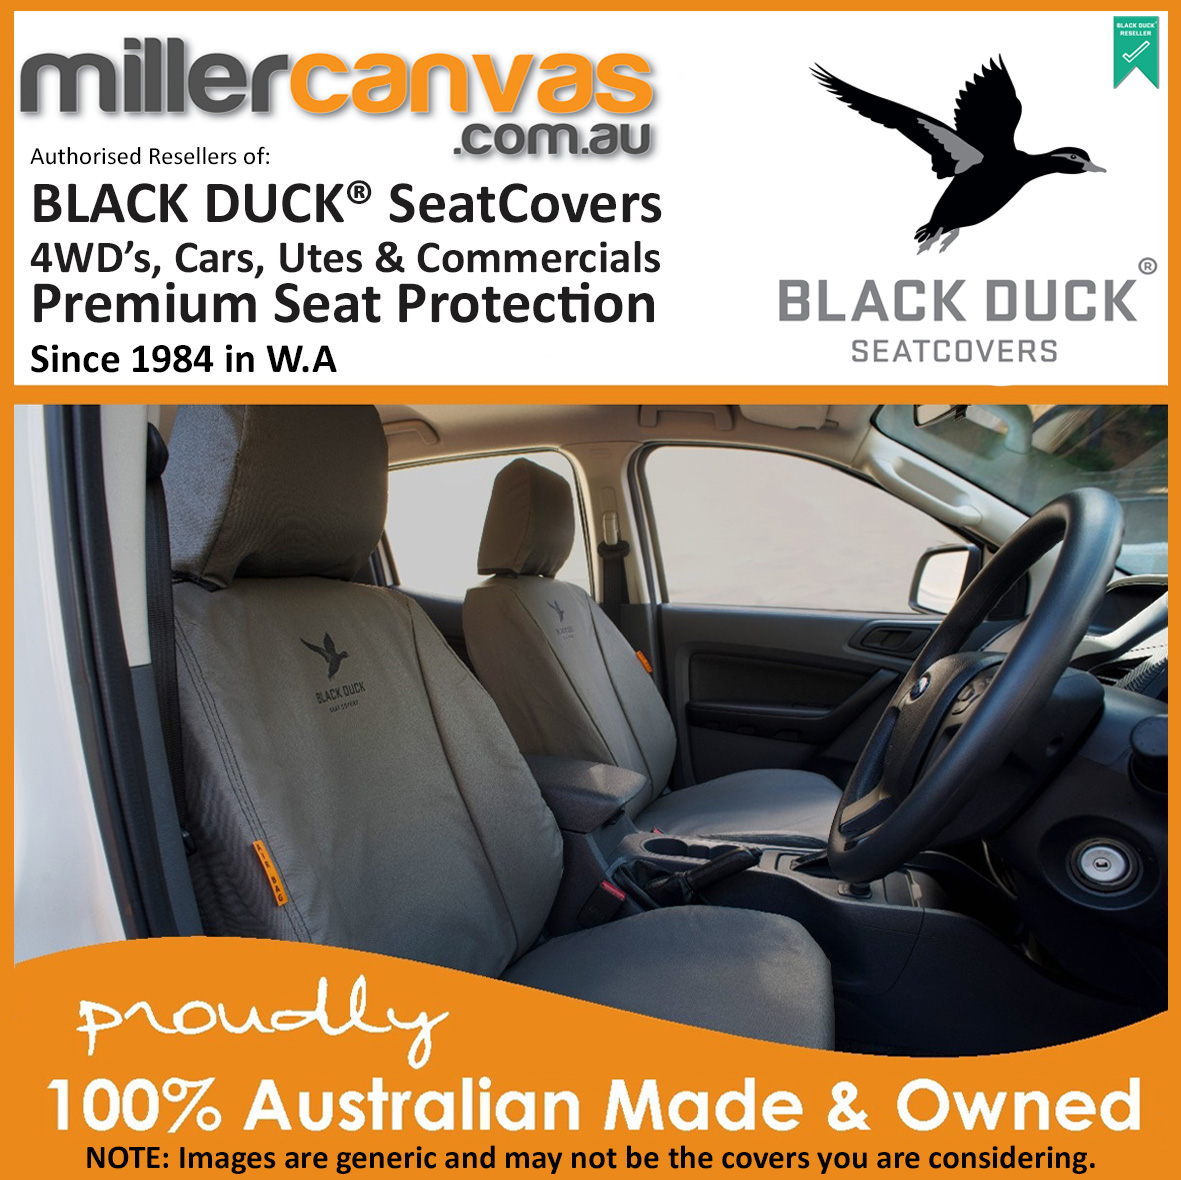 2+1 GREY BLACK SOFT FABRIC SEAT & ARMREST COVERS SET FOR IVECO DAILY